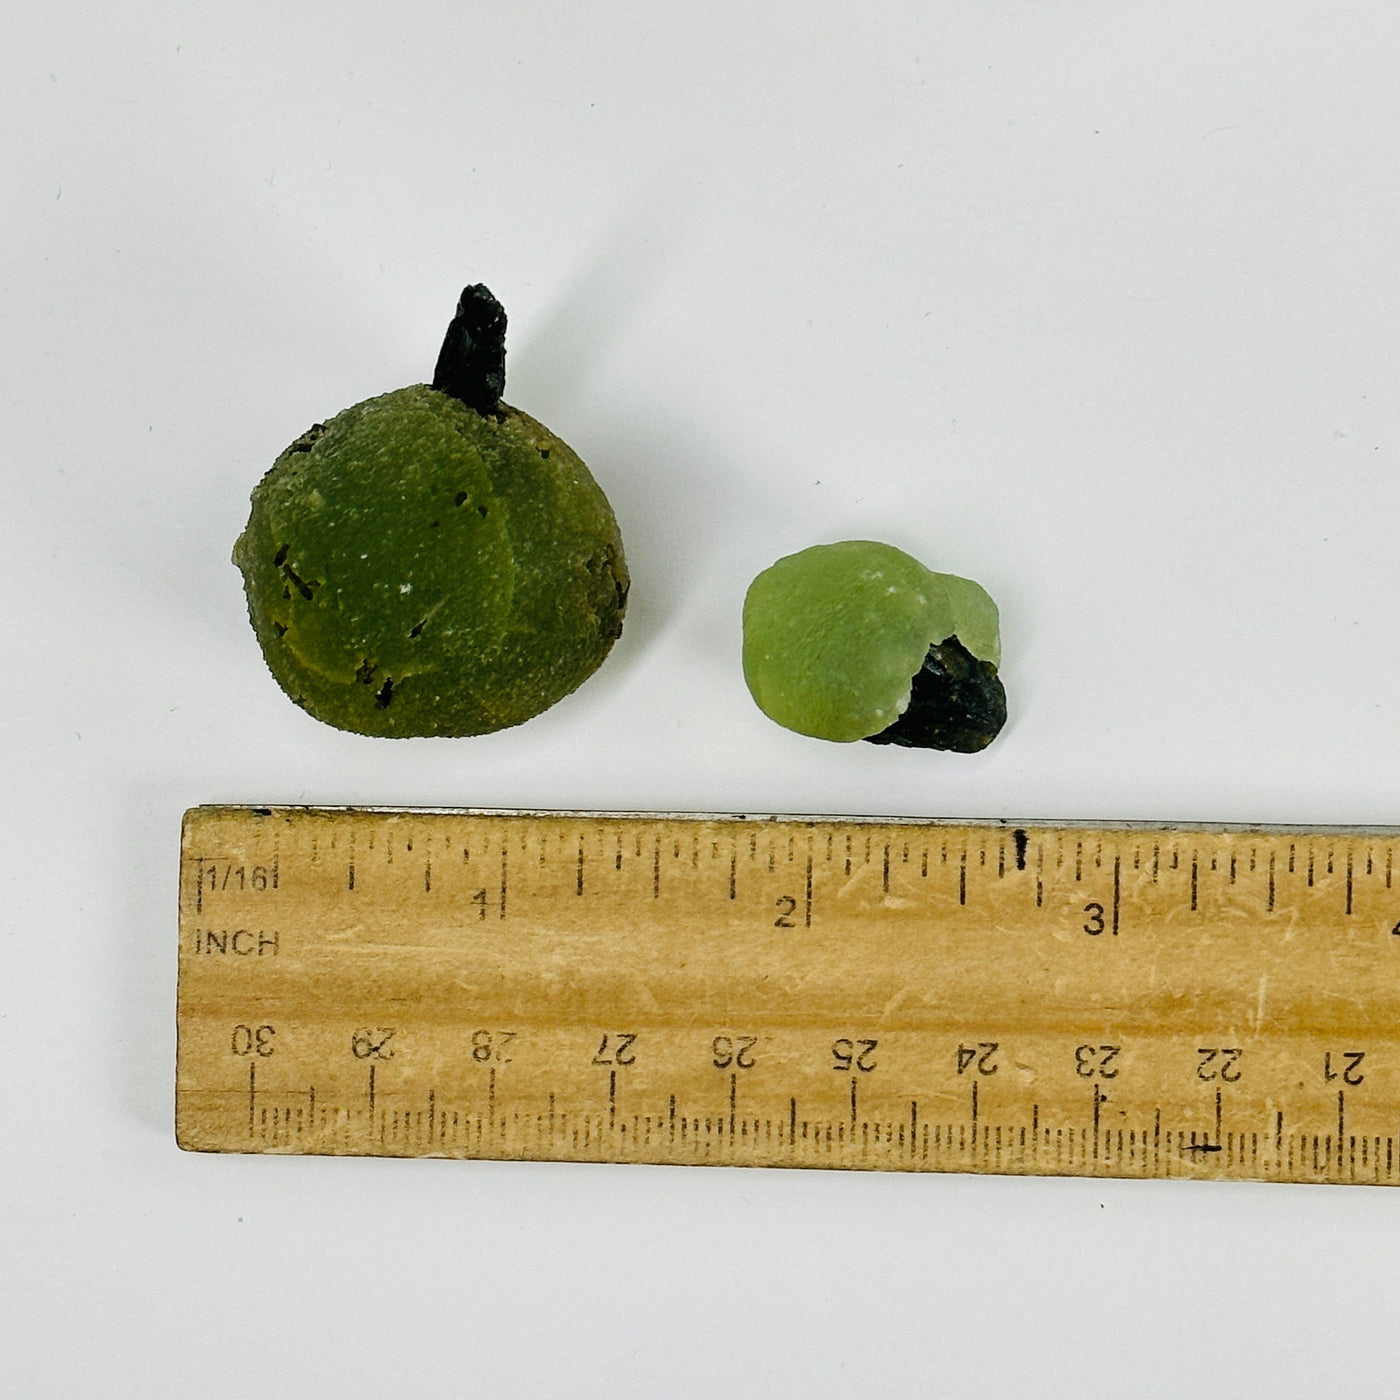 2 episode with prehnite cluster next to a ruler for size reference